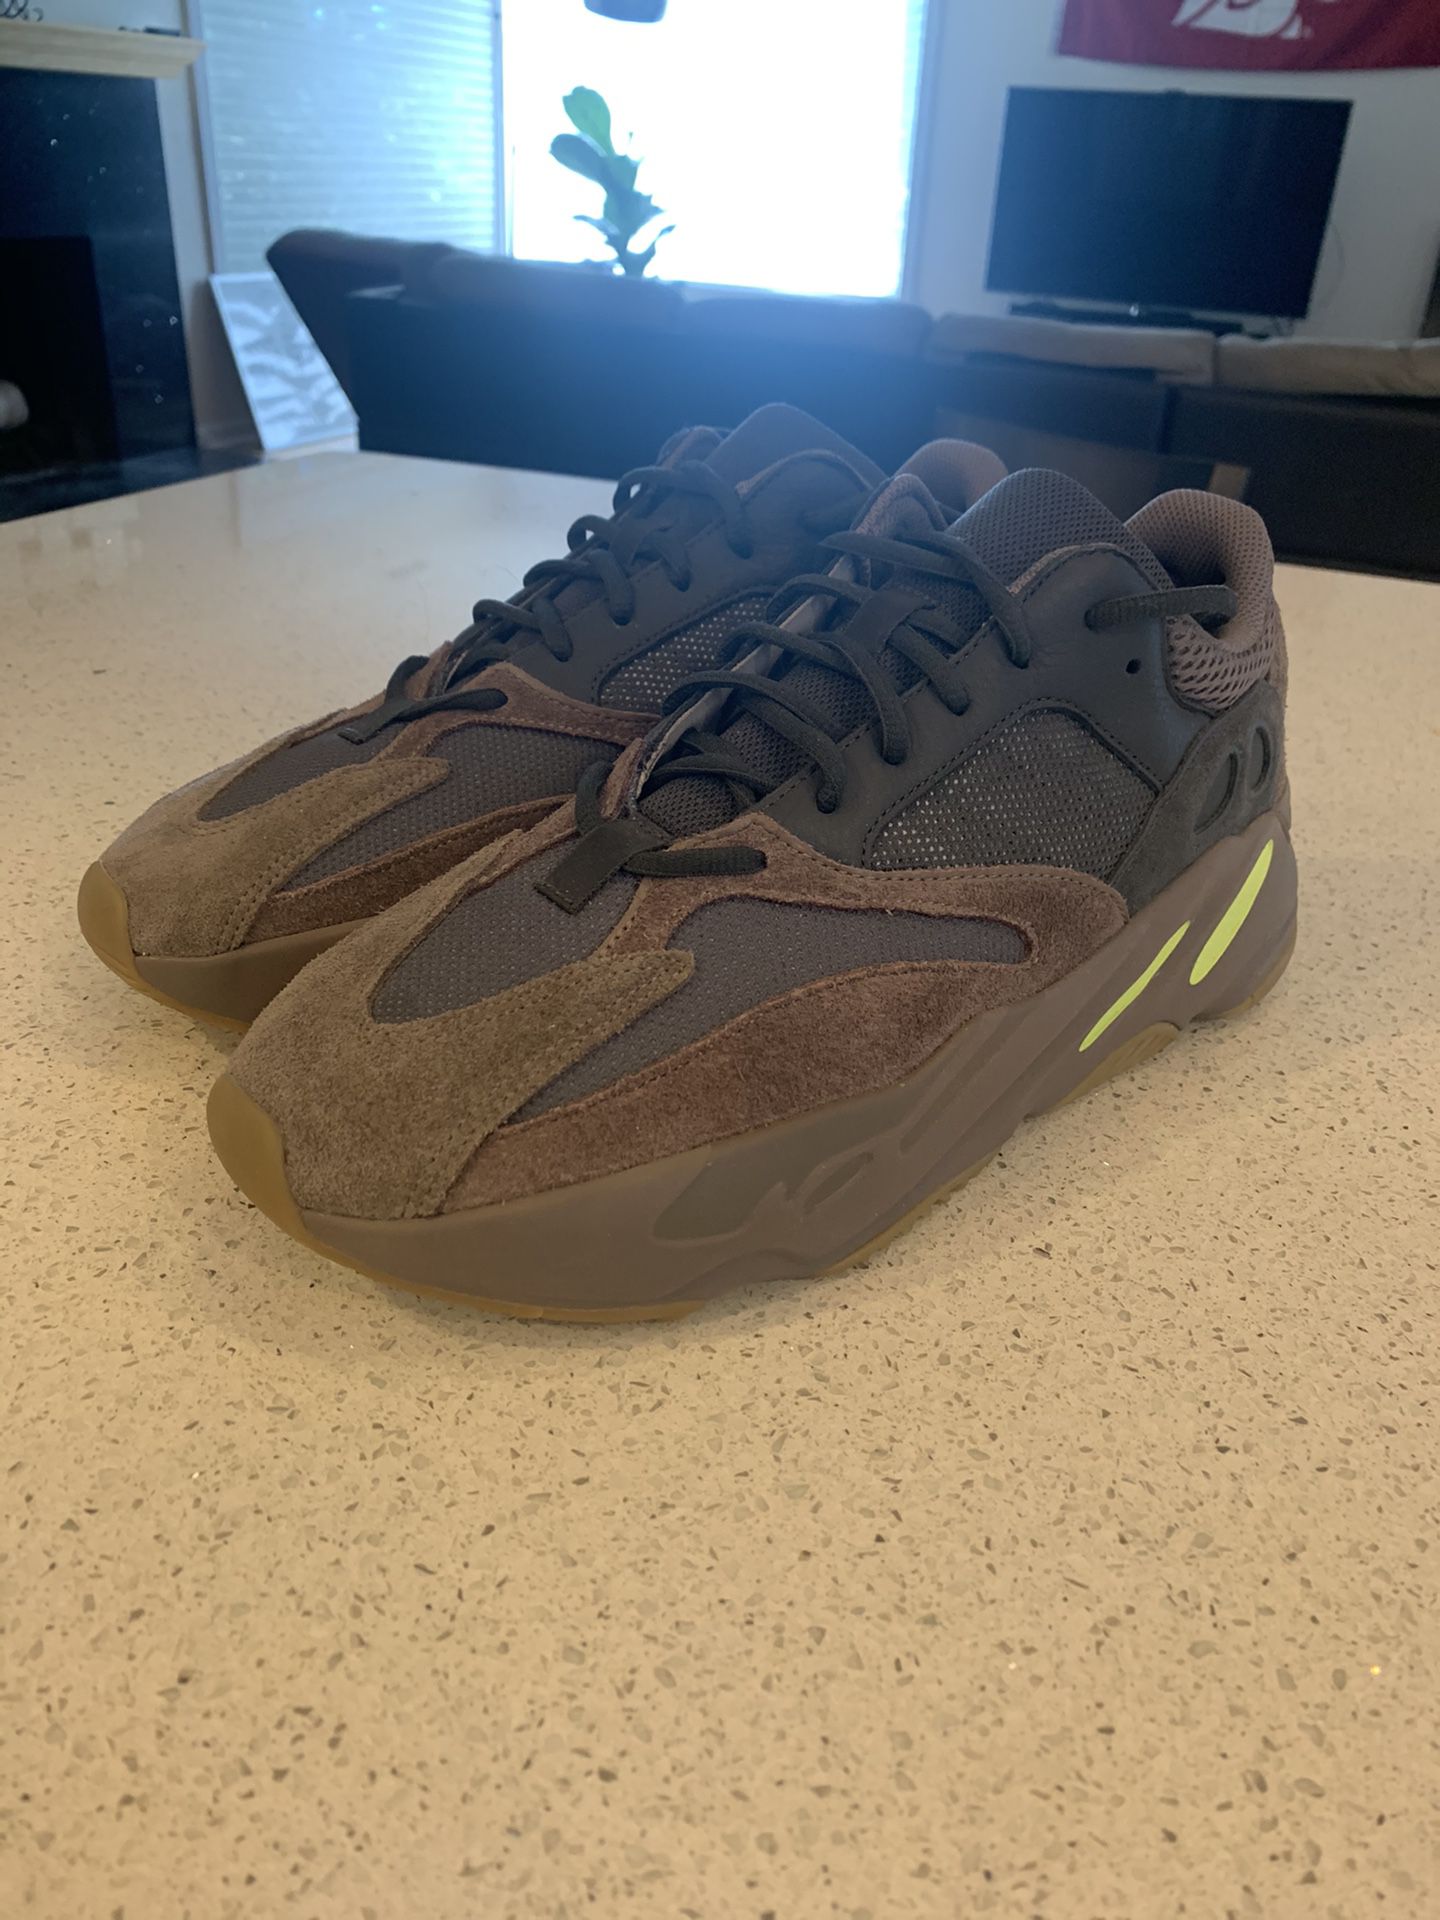 Yeezy boost 700 muave